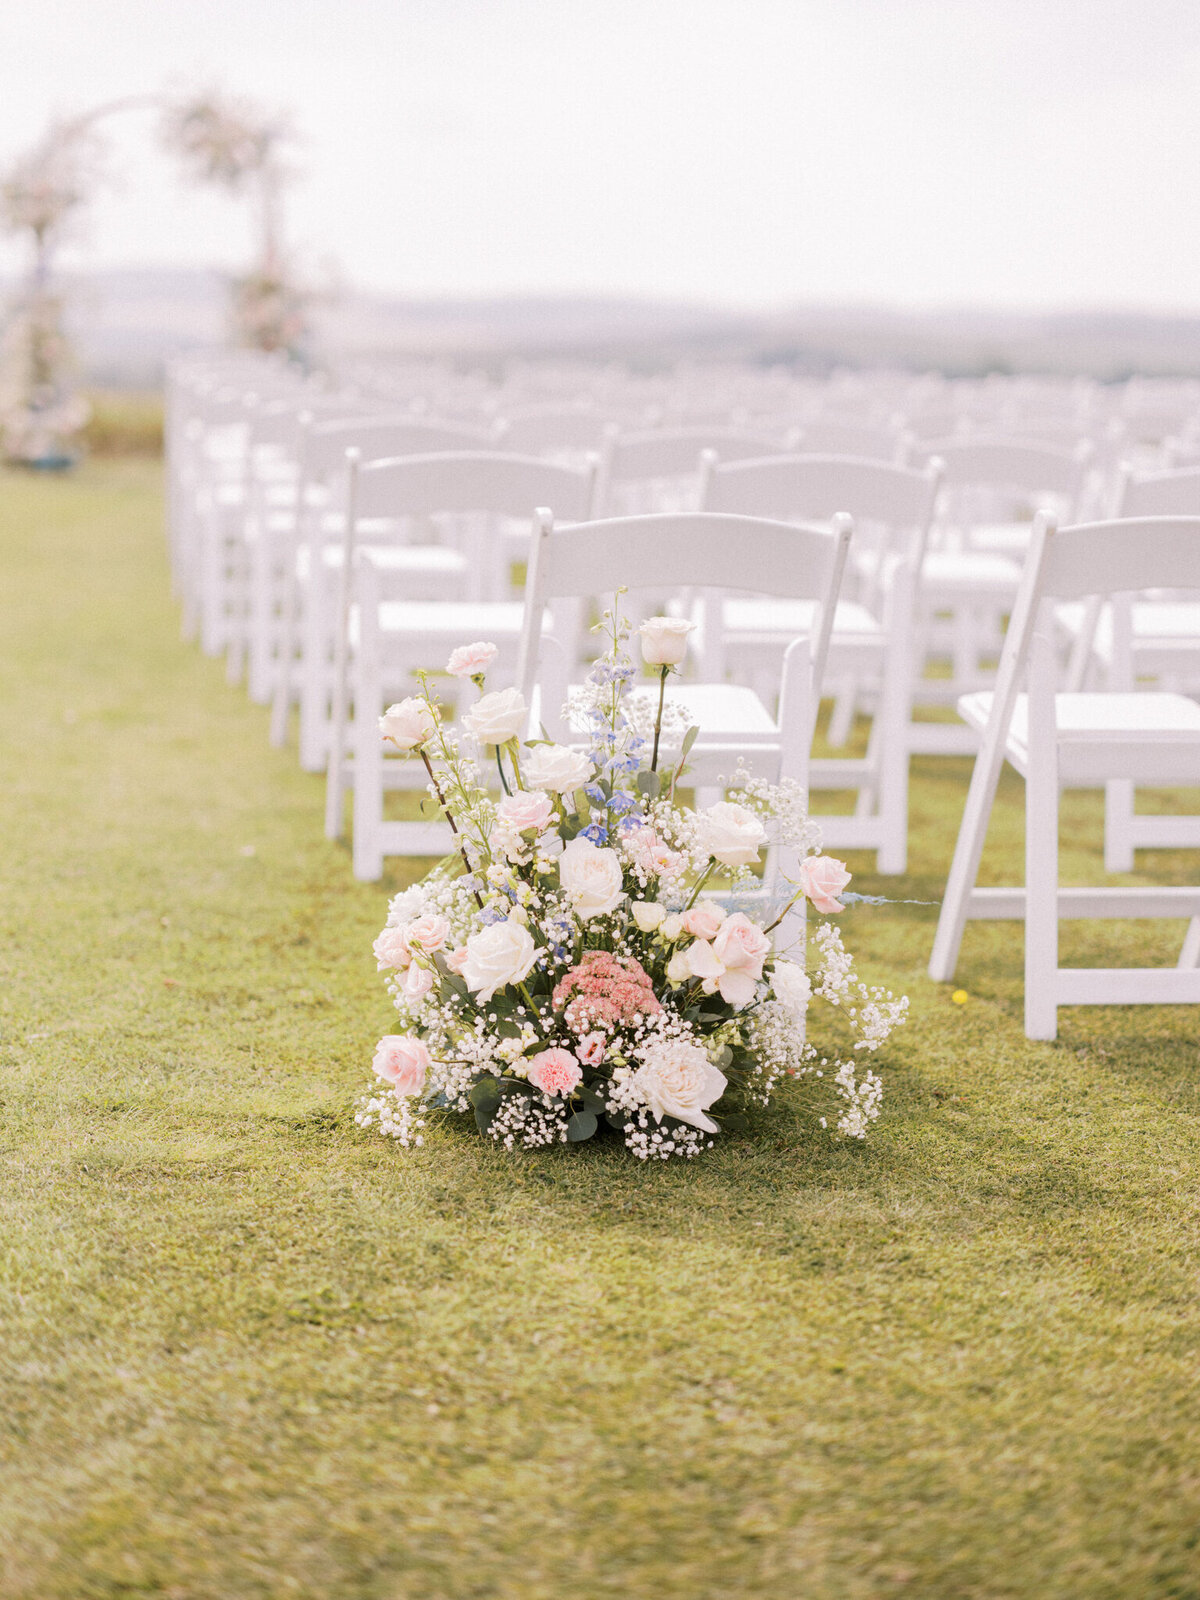 Classic pink and white roses at wedding ceremony by Flower Aura By Natasha, classic Calgary, Alberta wedding florist, featured on the Brontë Bride Vendor Guide.